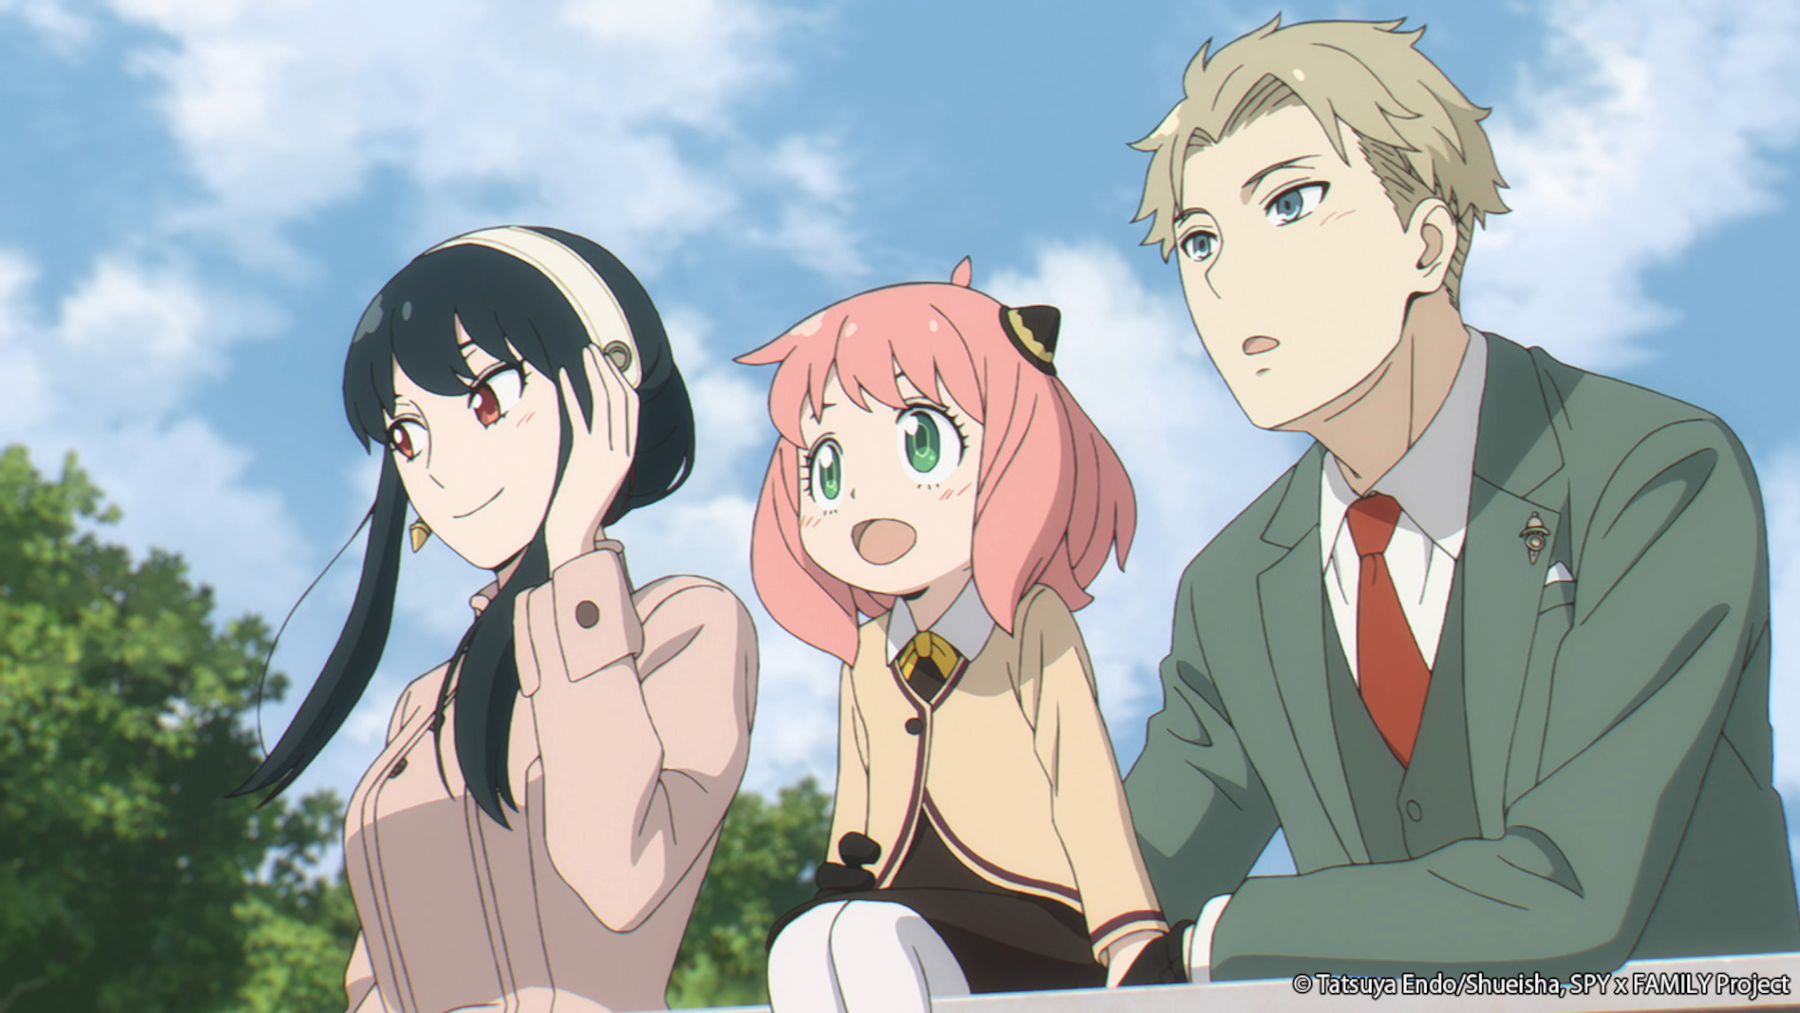 Yor, Anya, and Loid Forger in 'Spy x Family' for our article about episode 24 and its release schedule and preview. The Forger family is leaning on a railining and looking happily out at something. The sky behind them is blue.